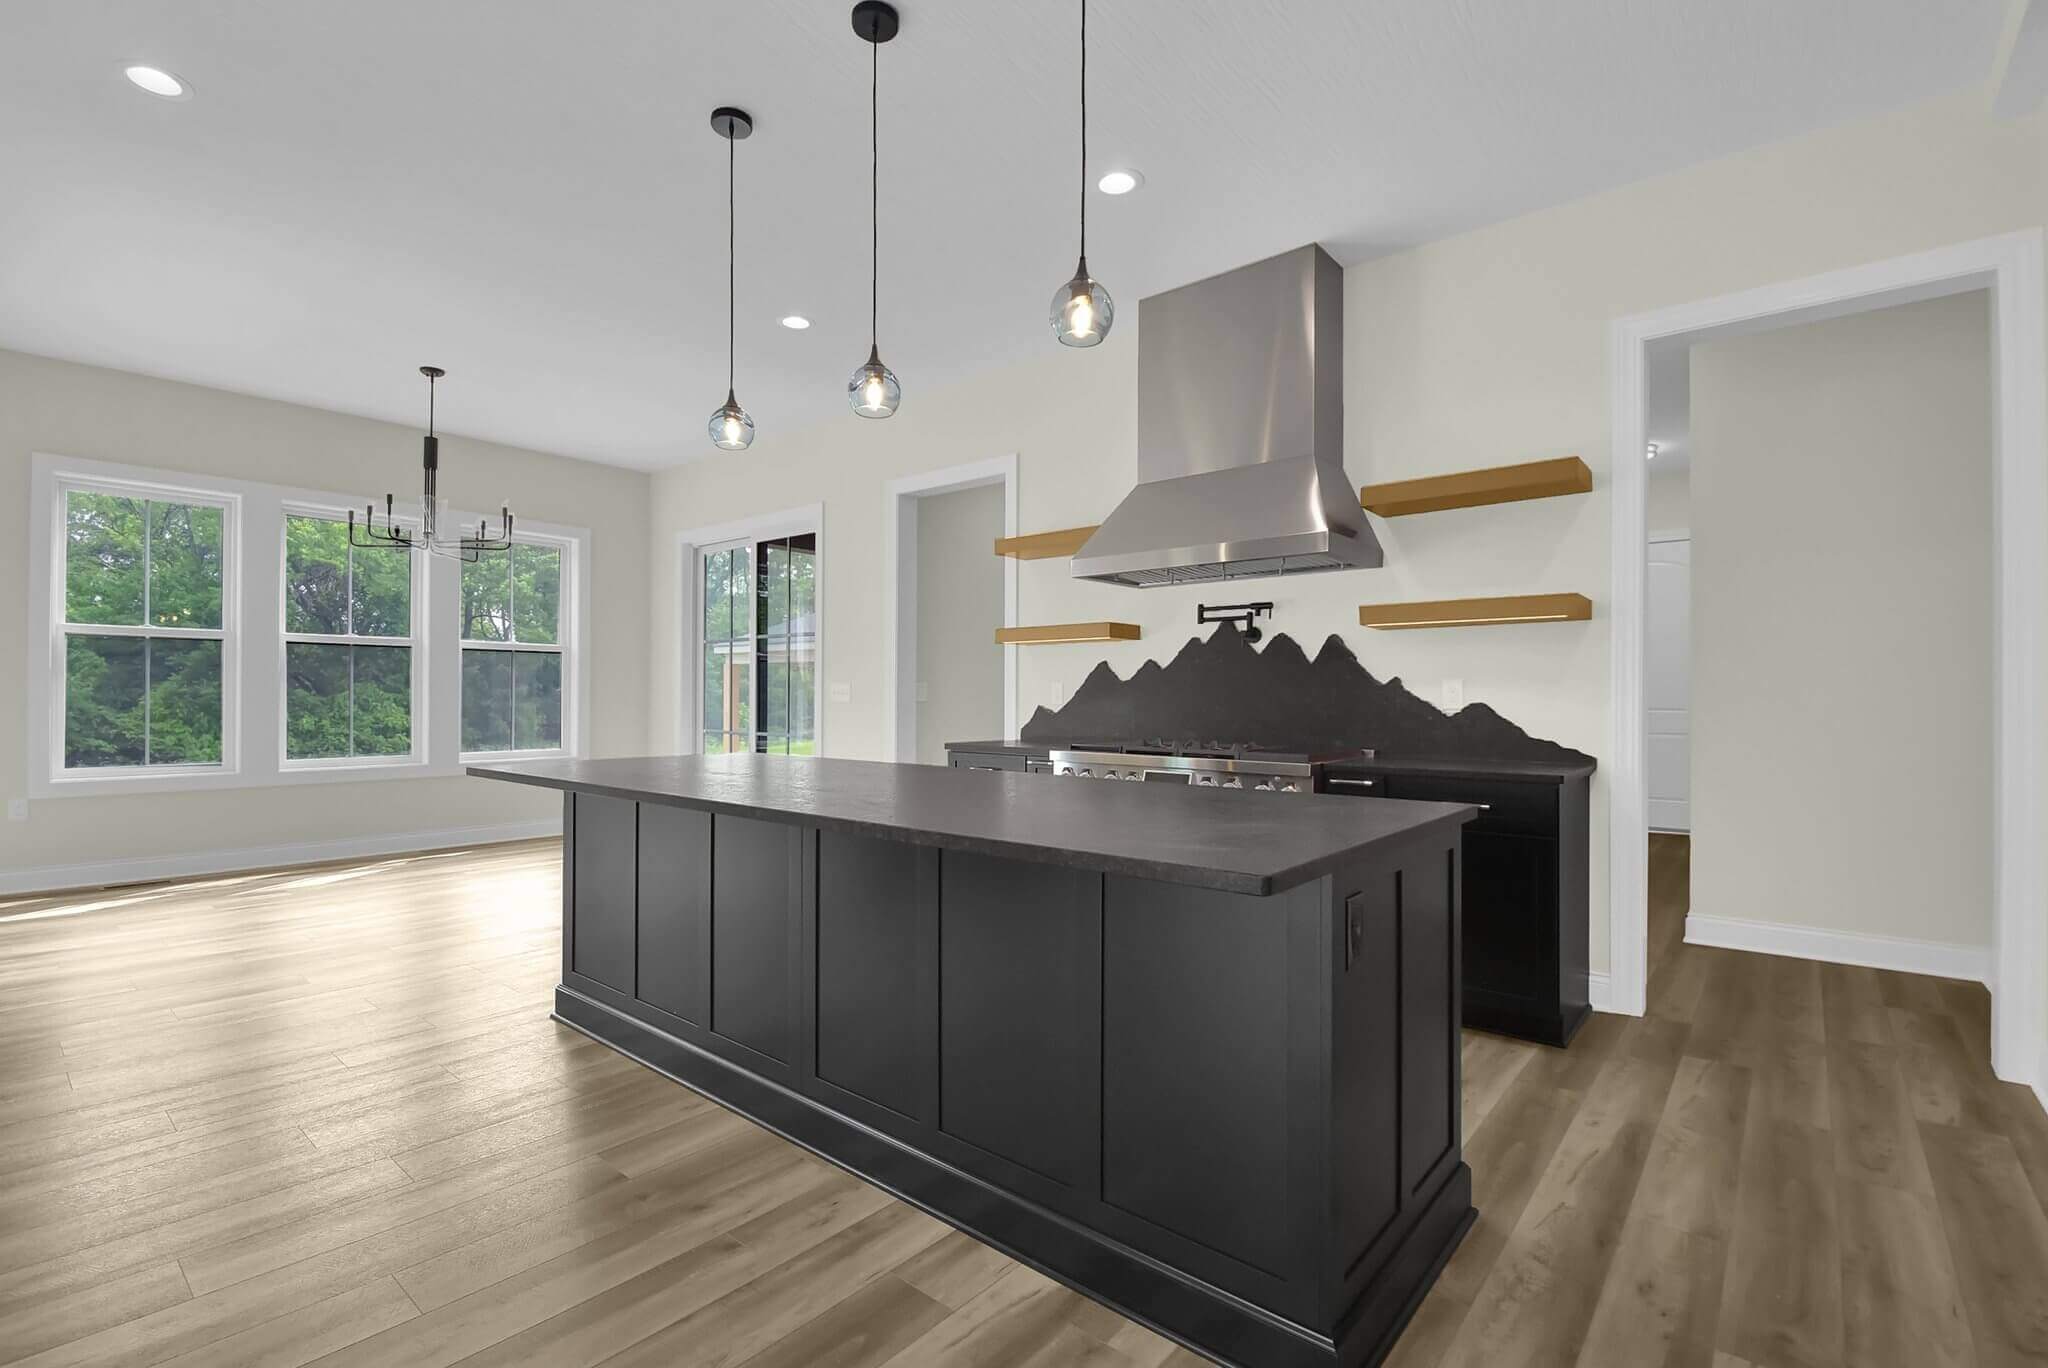 Driven by Passion - Powered by Dreams- Let Coppertree Homes build your next custom home! Give us a call at 614-425-2649 or visit us at https://coppertreehomes.com/